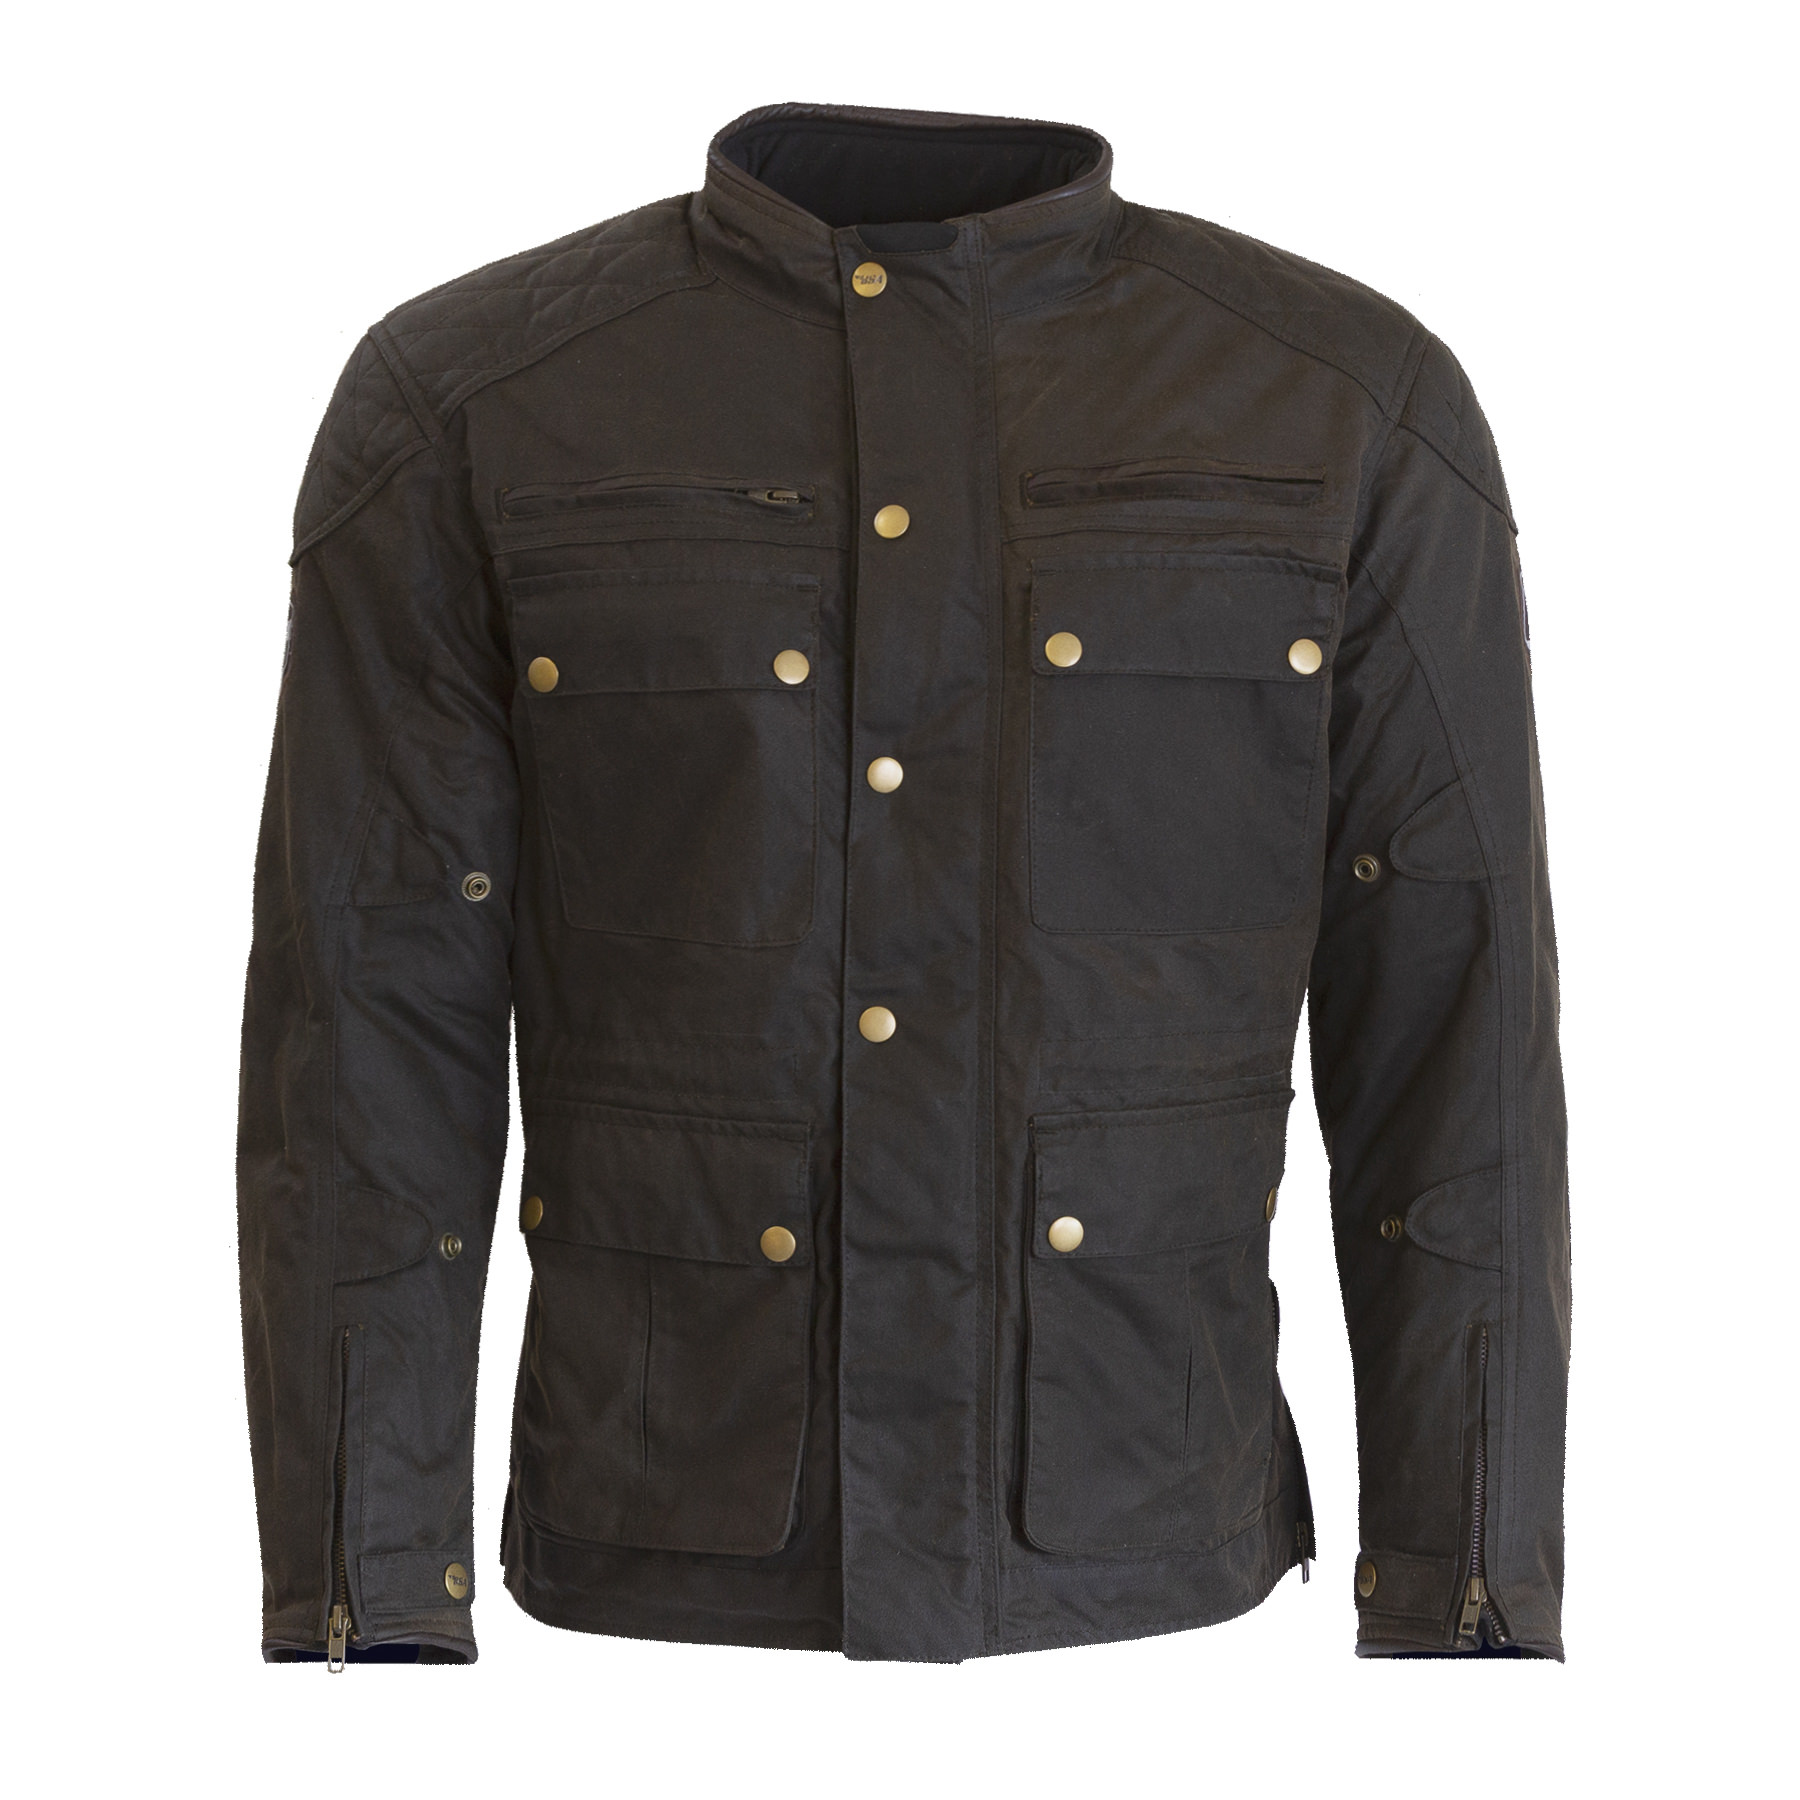 The Empire Waxed Cotton Jacket By BSA x Merlin Apparel